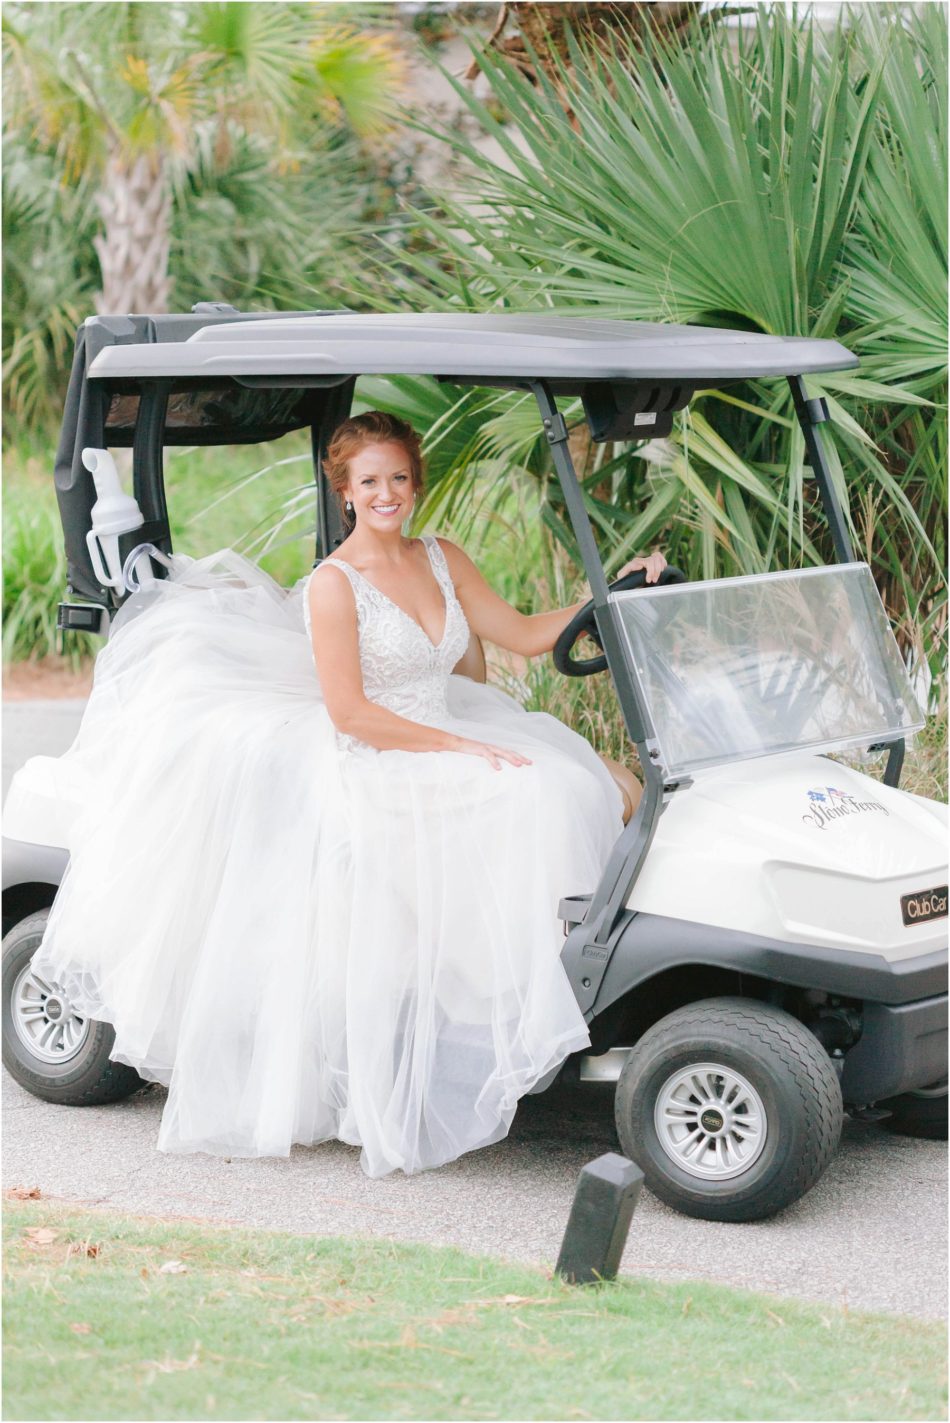 Bridal portraits at the Stono Ferry Golf Course and Club, Charleston, South Carolina Kate Timbers Photography. http://katetimbers.com #katetimbersphotography // Charleston Photography // Inspiration